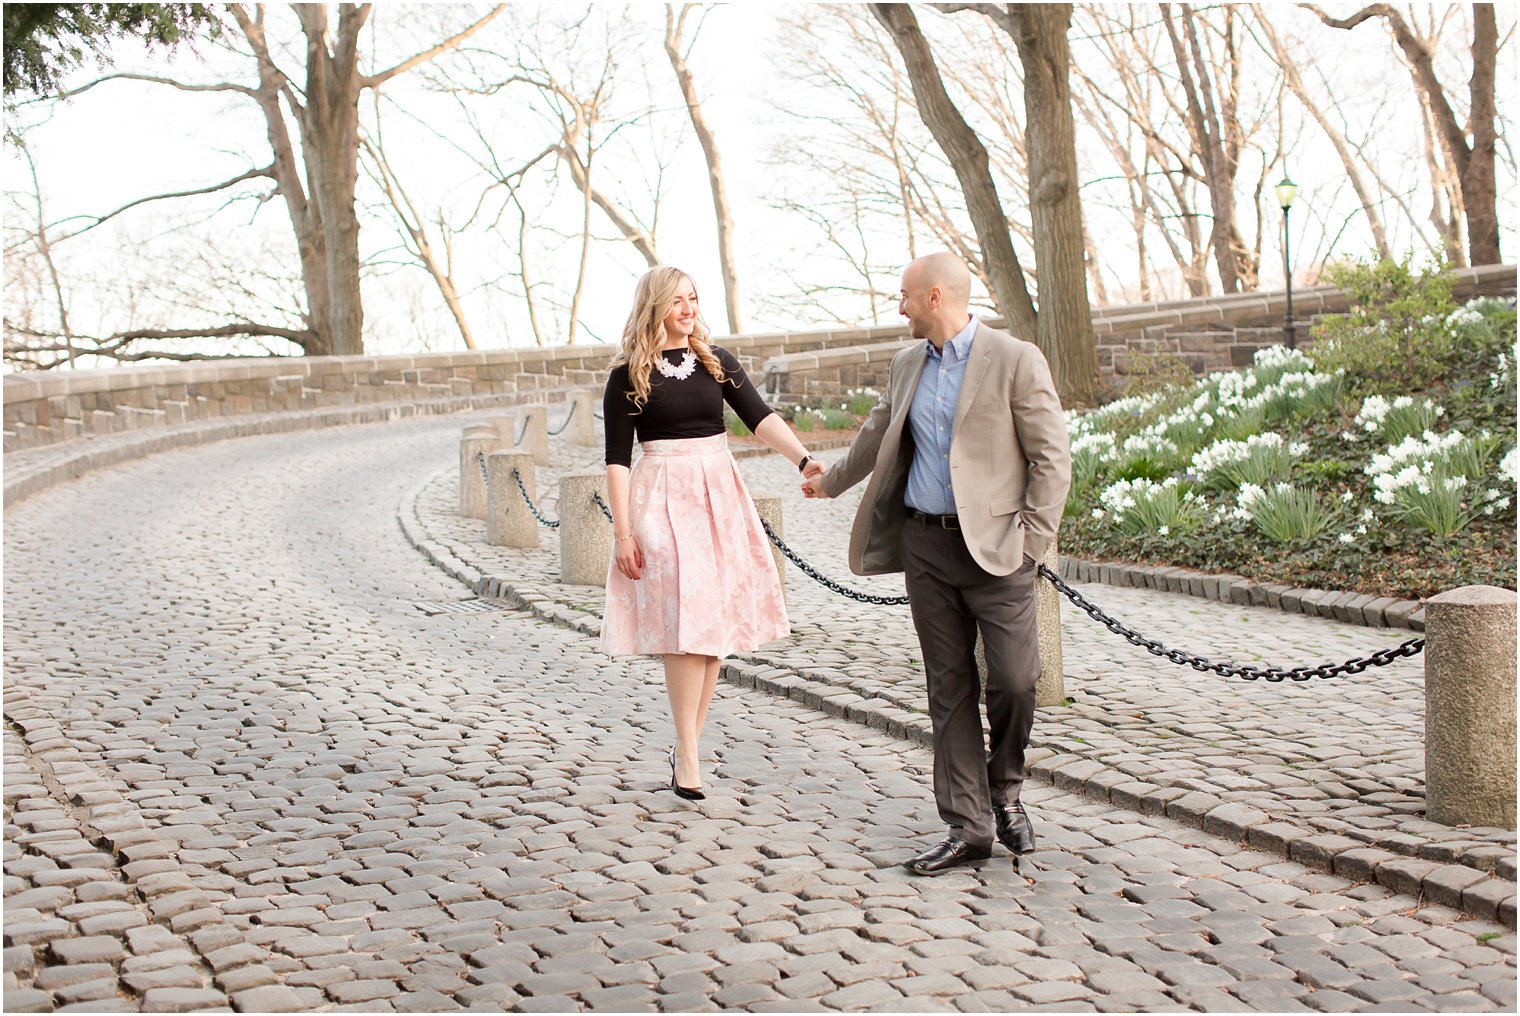 Couple walking at Cloisters in NYC